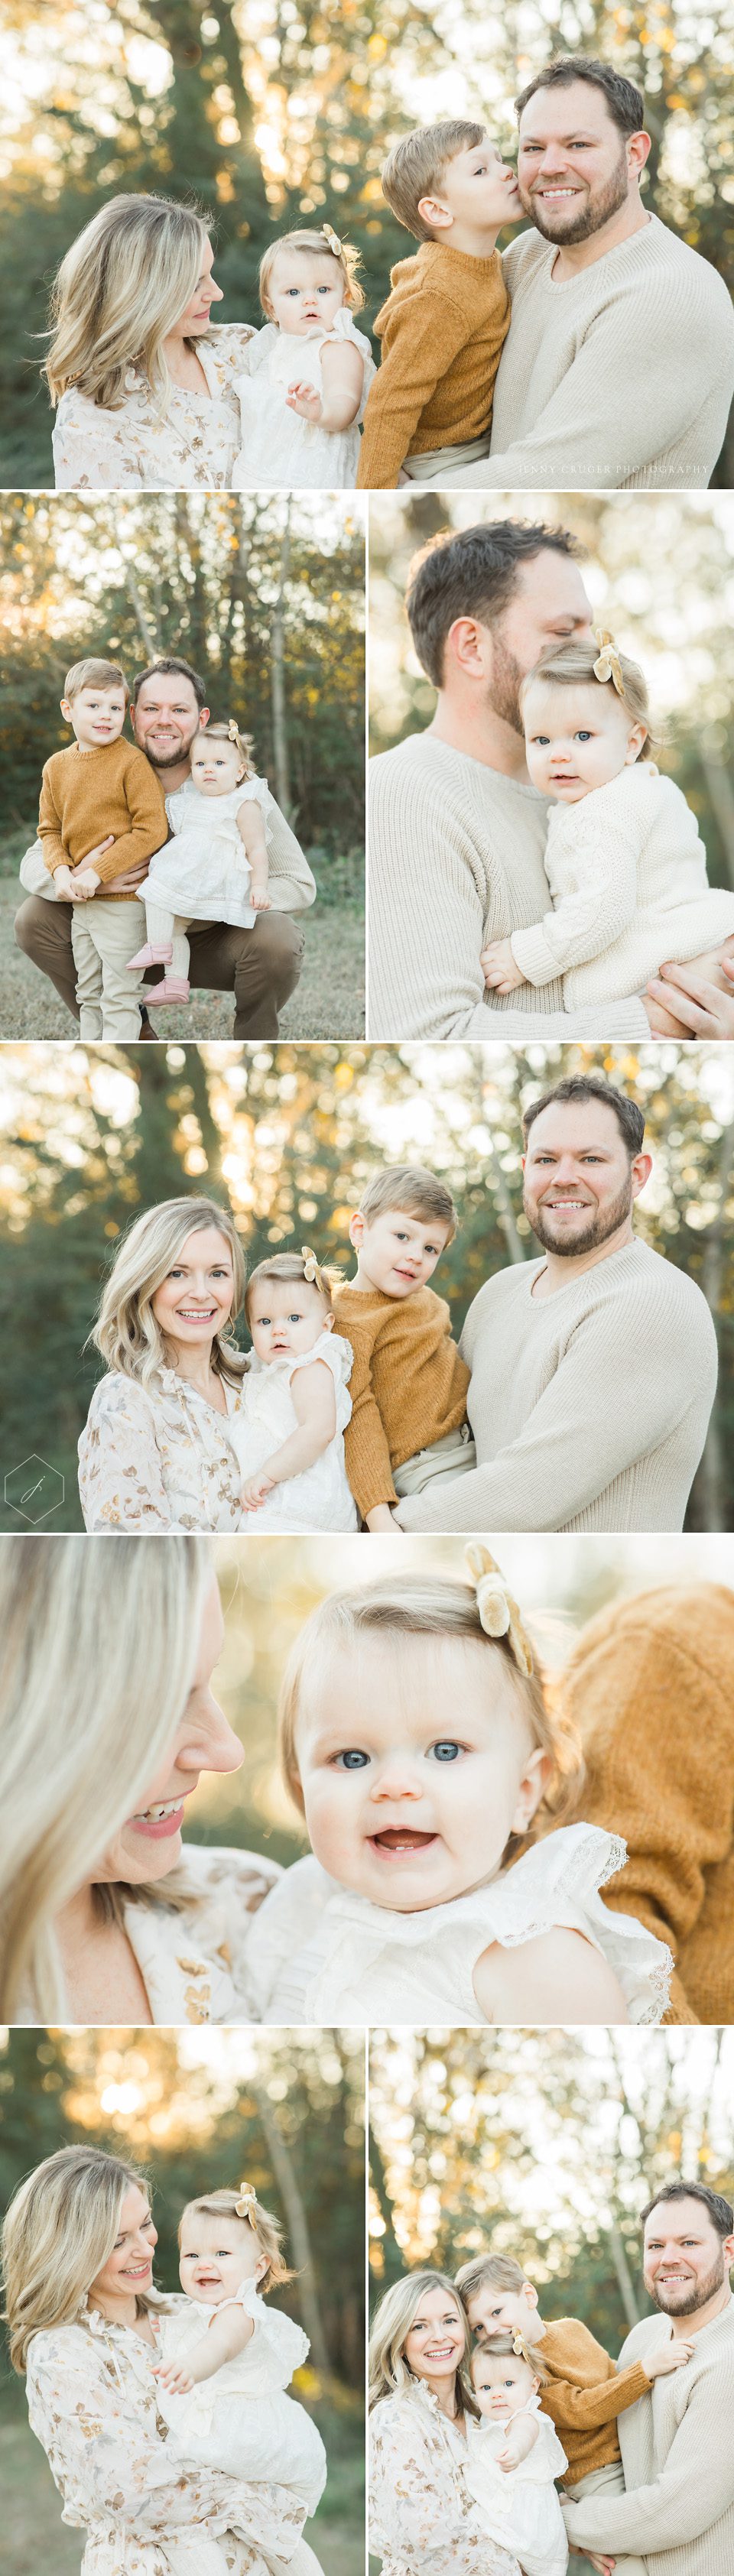 family photos at golden hour in field 